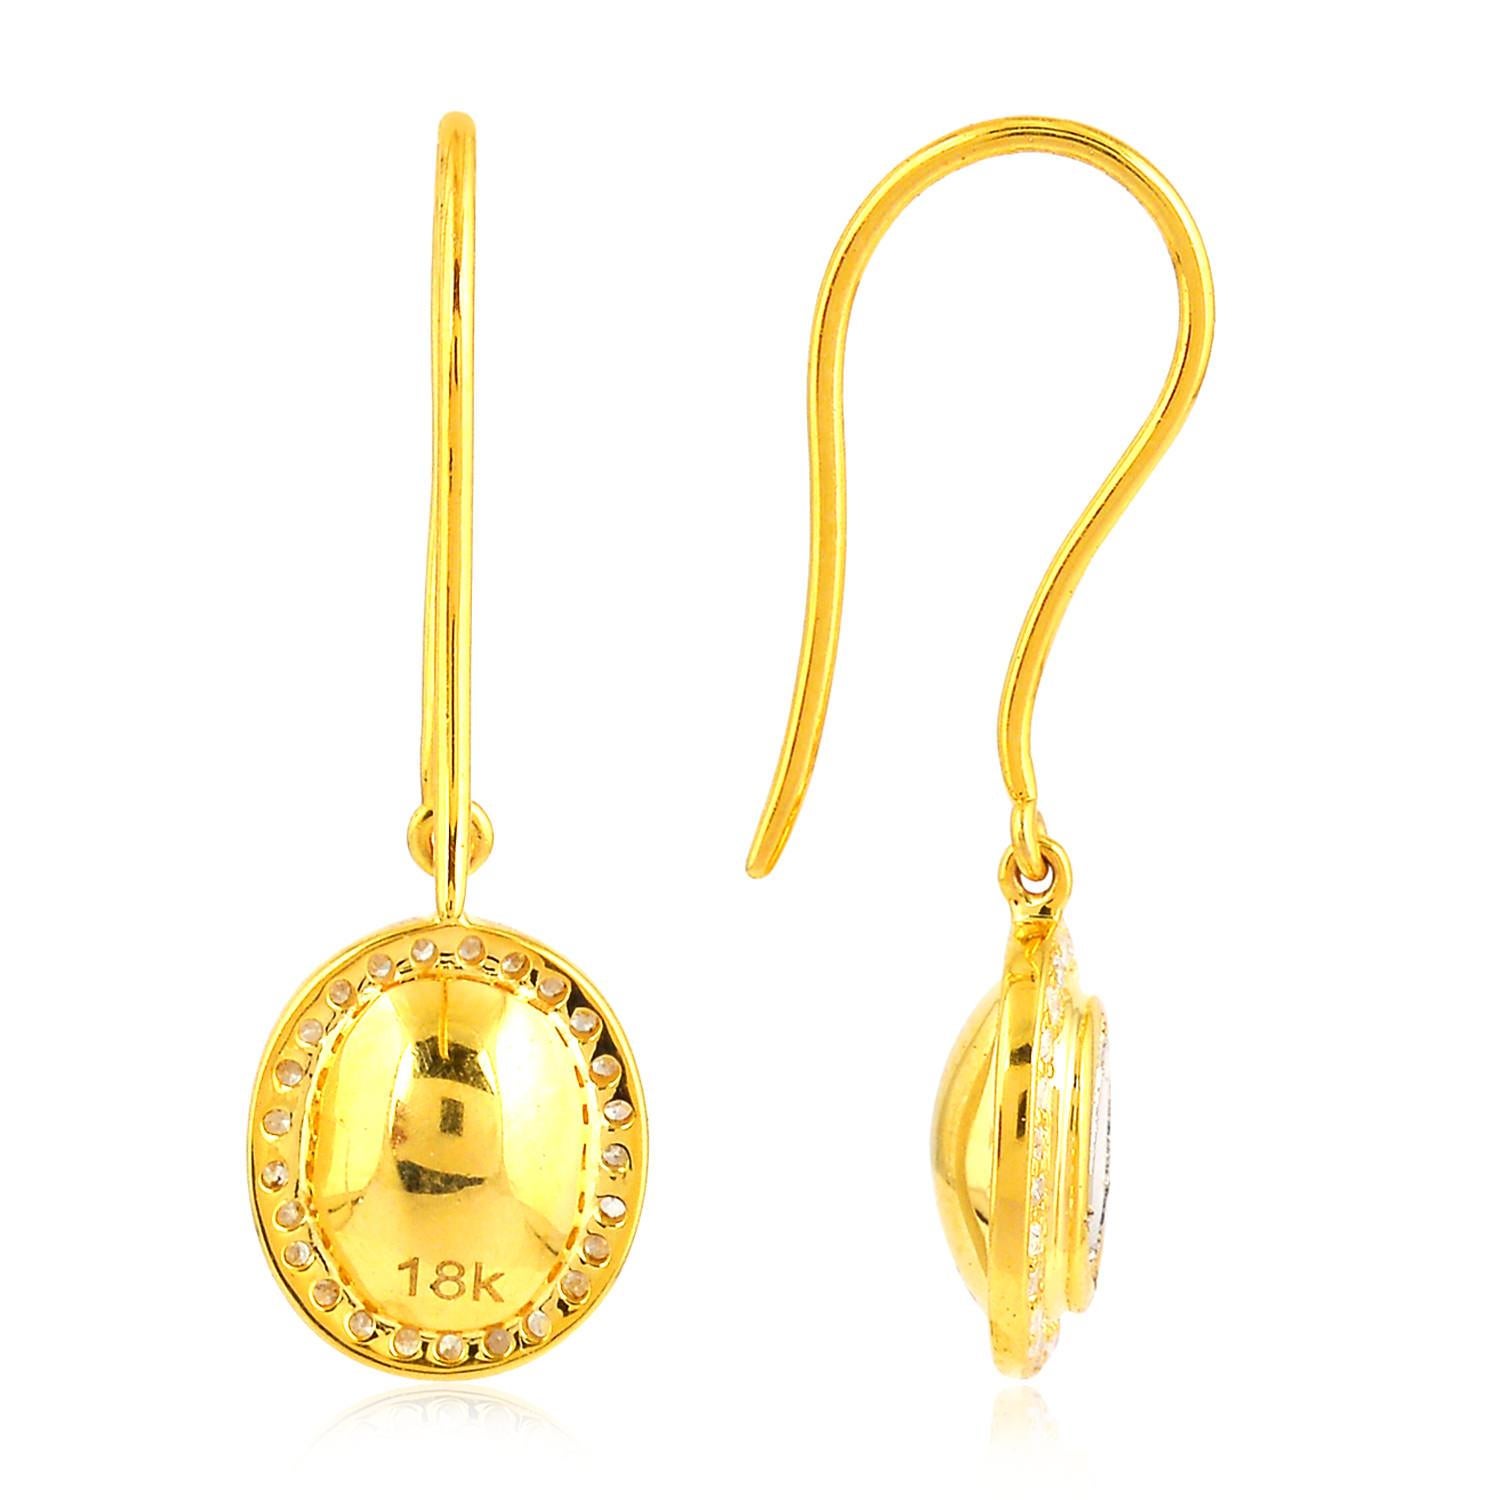 Handcrafted from 18-karat gold, these beautiful drop earrings are set with .77 carats of rosecut diamonds. 

FOLLOW  MEGHNA JEWELS storefront to view the latest collection & exclusive pieces.  Meghna Jewels is proudly rated as a Top Seller on